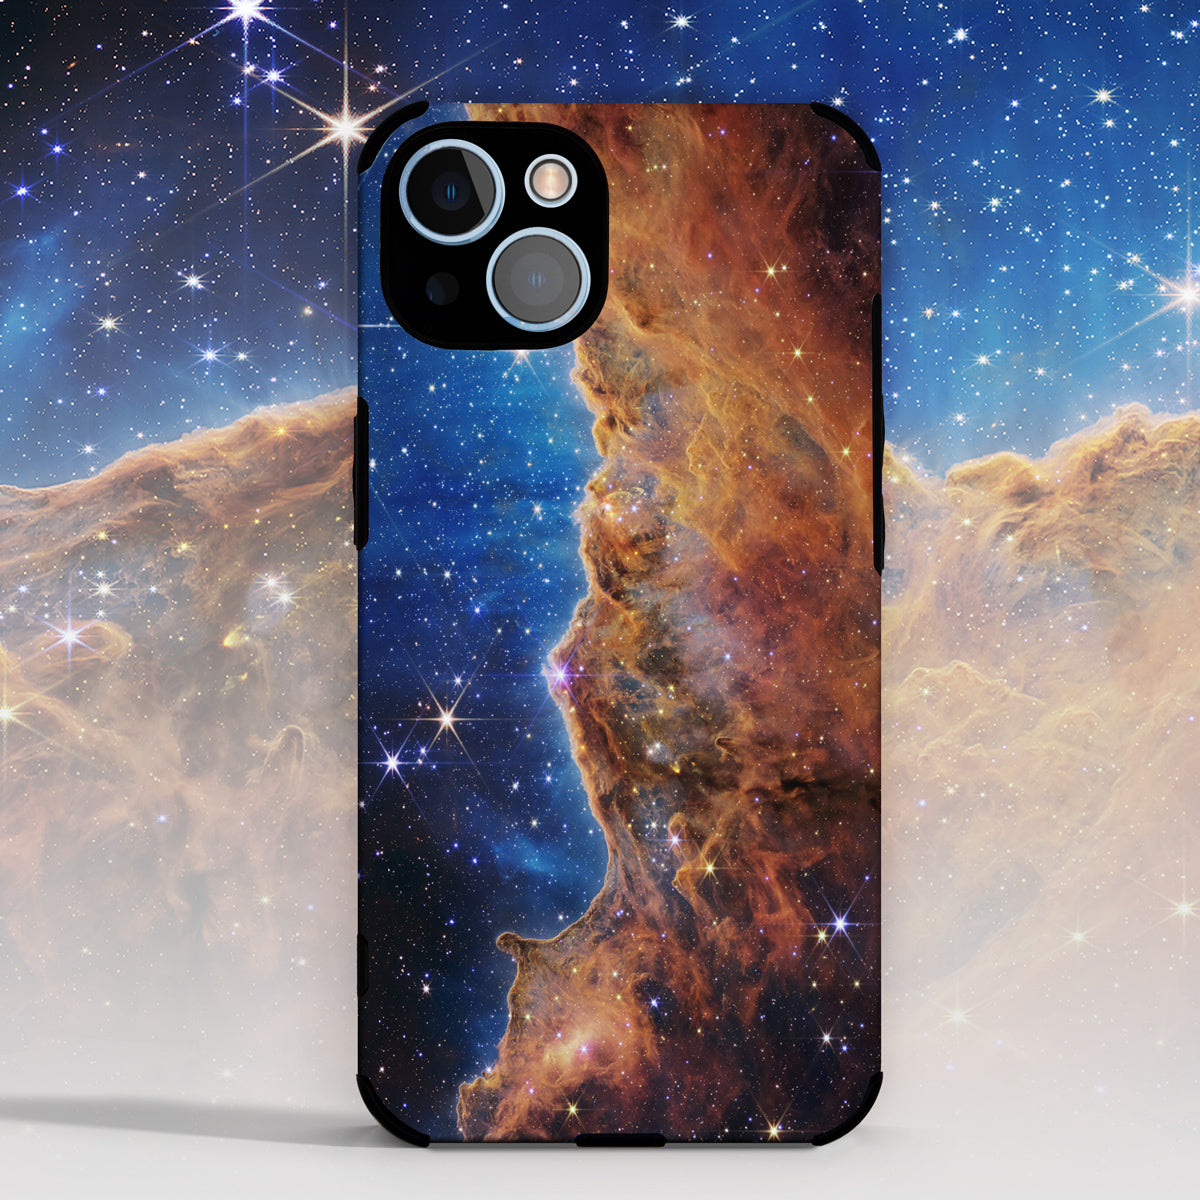 James Webb Space Telesope image phone case apple iphone samsung xiaomi huawei android